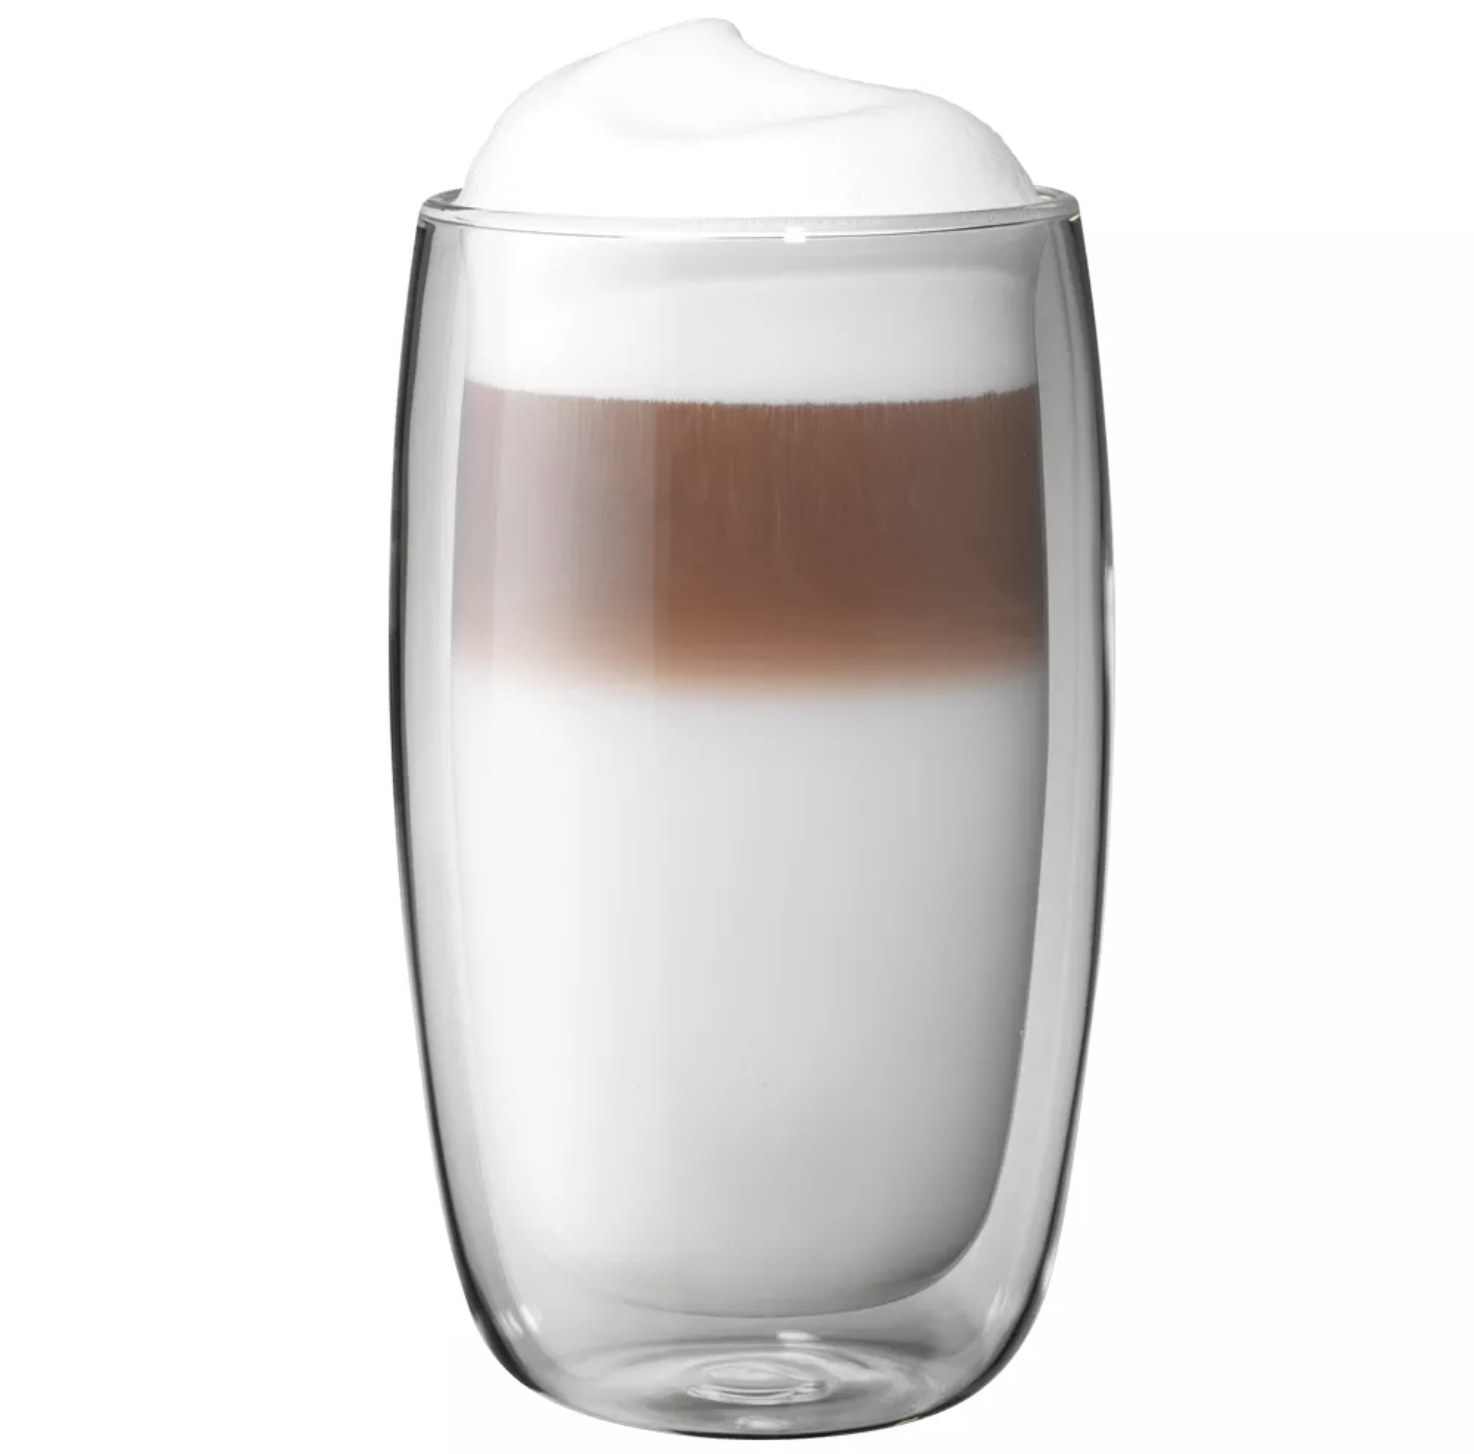 A double-walled glass cup with a latté inside.